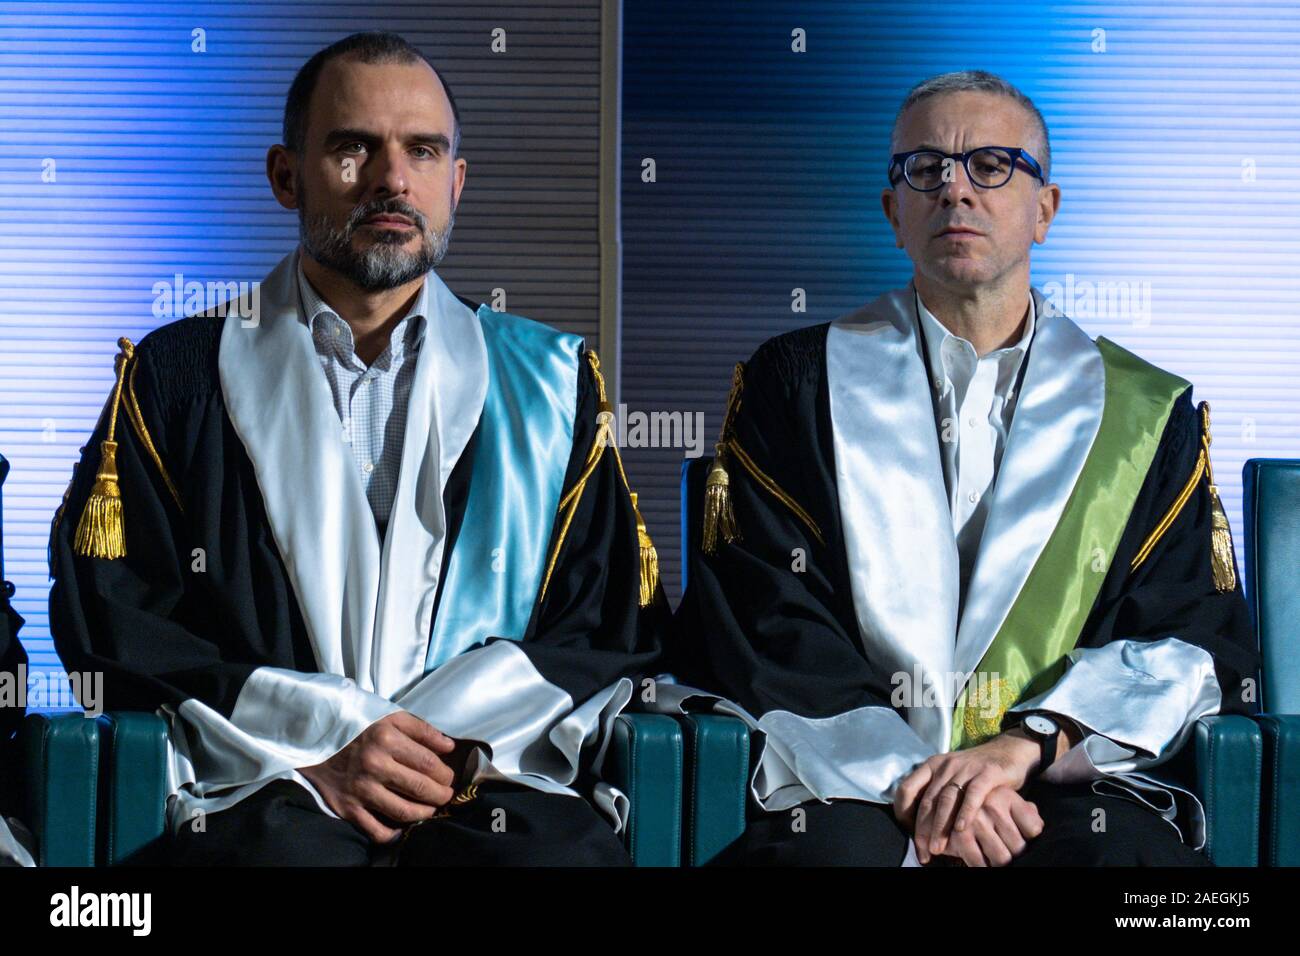 Milan, Italy. 9th Dec 2019. Ceremony of conferring the Master's Degree ad Honorem in Television, Cinema and New Madia to Marco Bellocchio at IULM University, Via Carlo Bo 7 Milan In the picture: Fabio Vittorini and Vincenzo Trione Editorial Usage Only Credit: Independent Photo Agency Srl/Alamy Live News Stock Photo